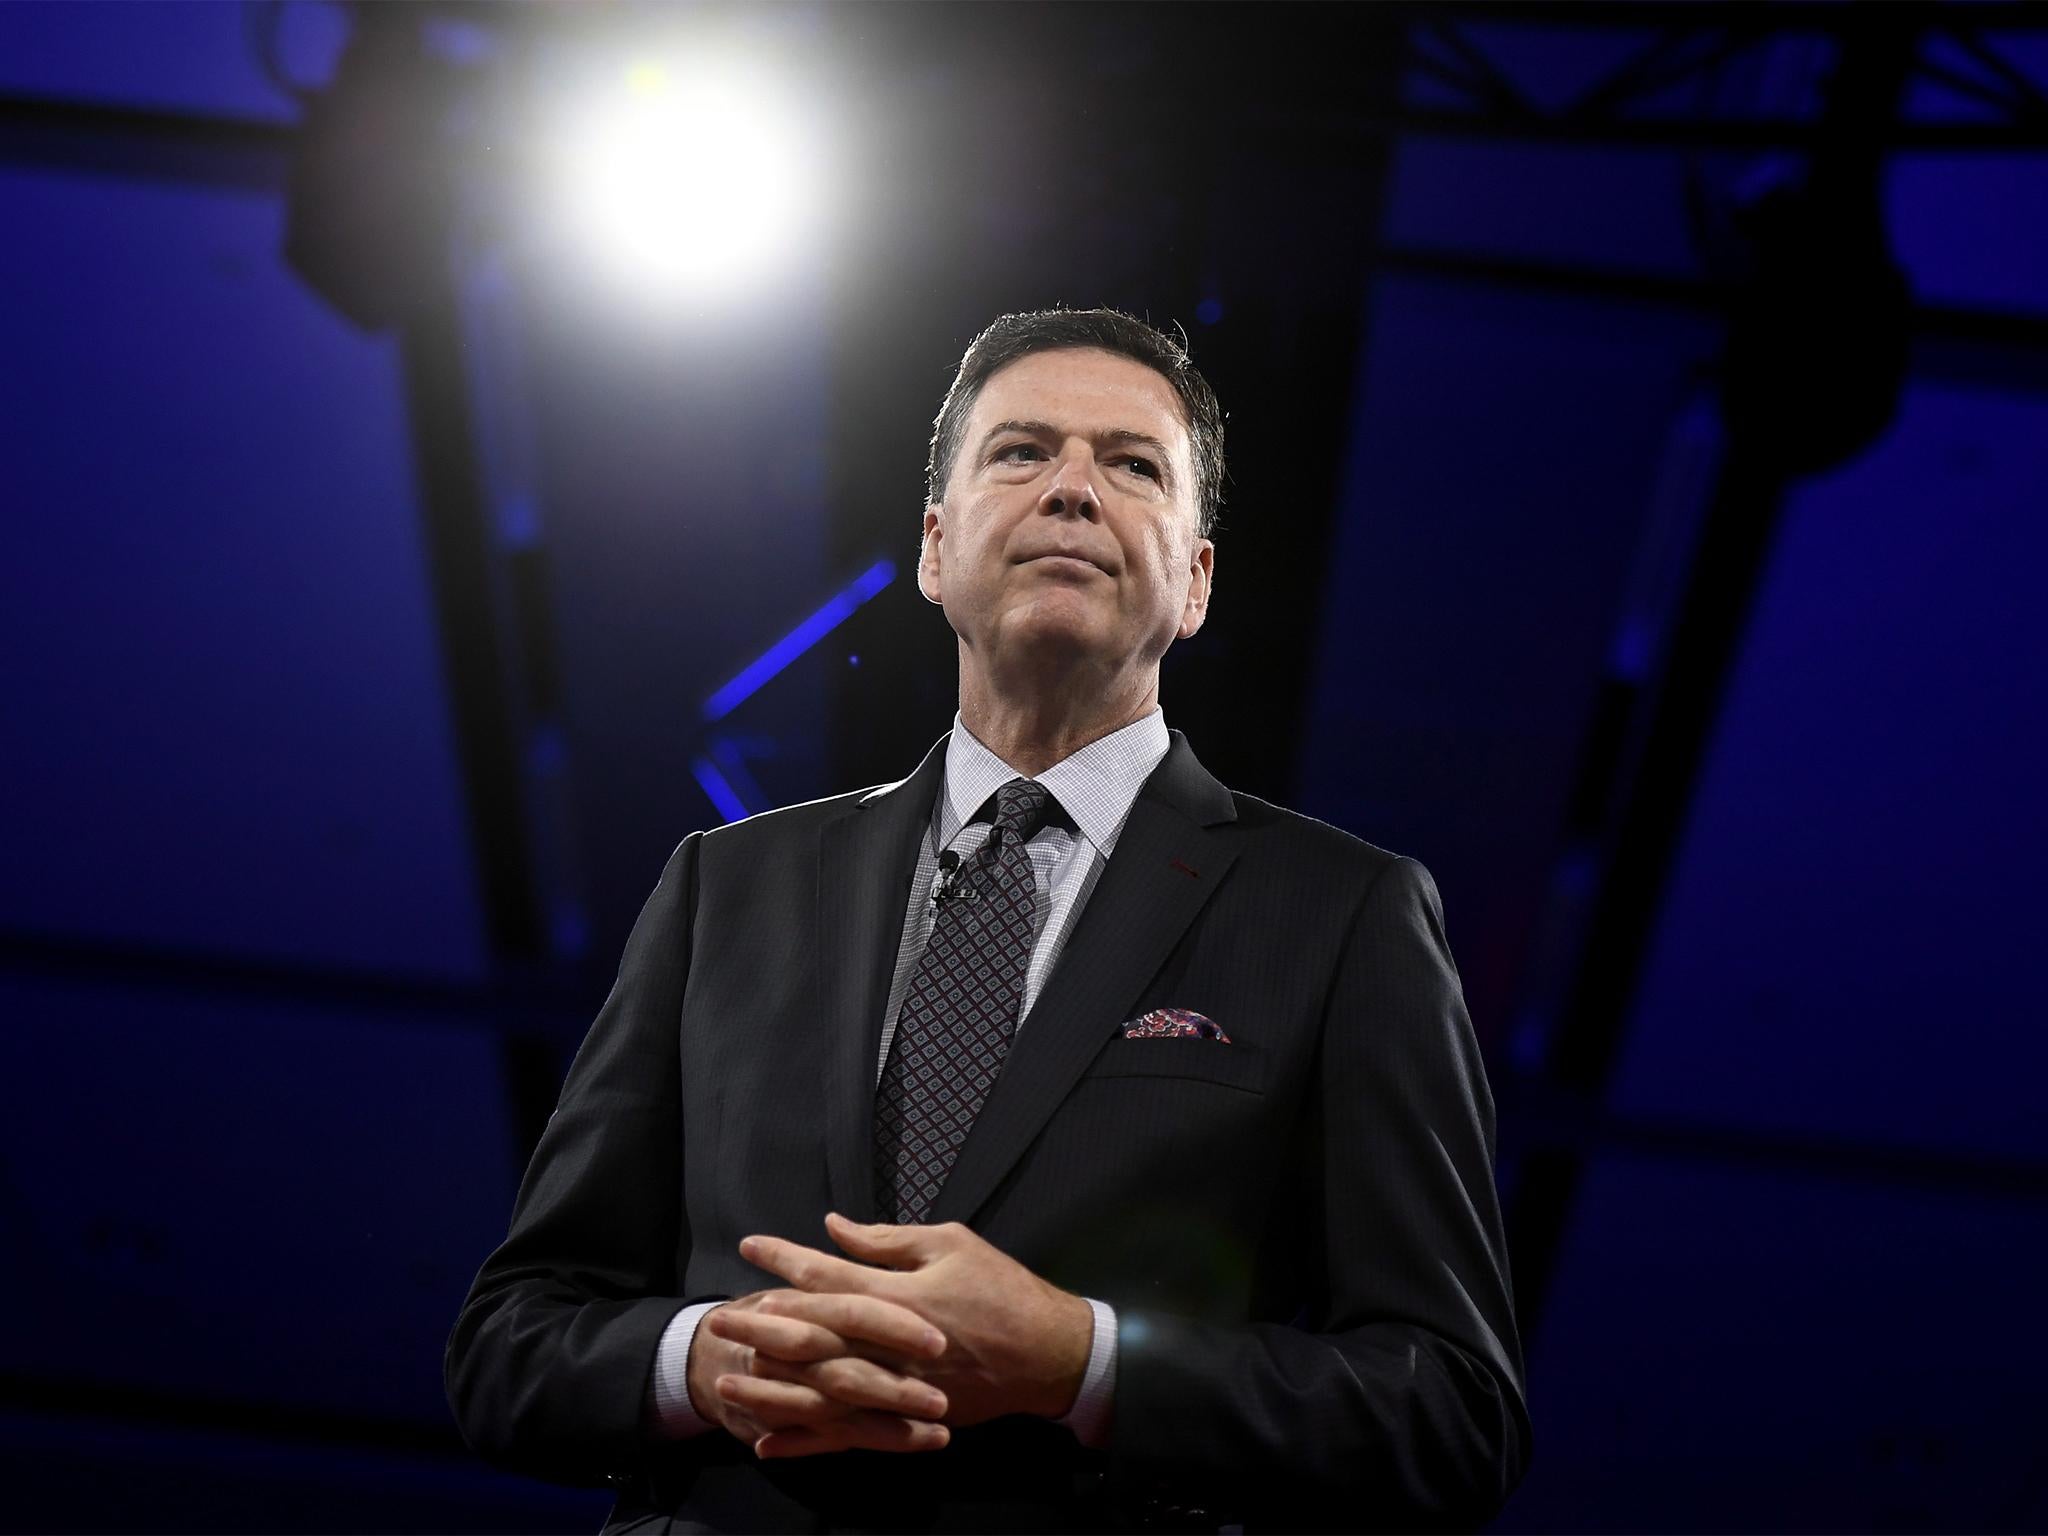 James Comey &apos;used personal email for FBI business&apos; during Hillary Clinton email investigation